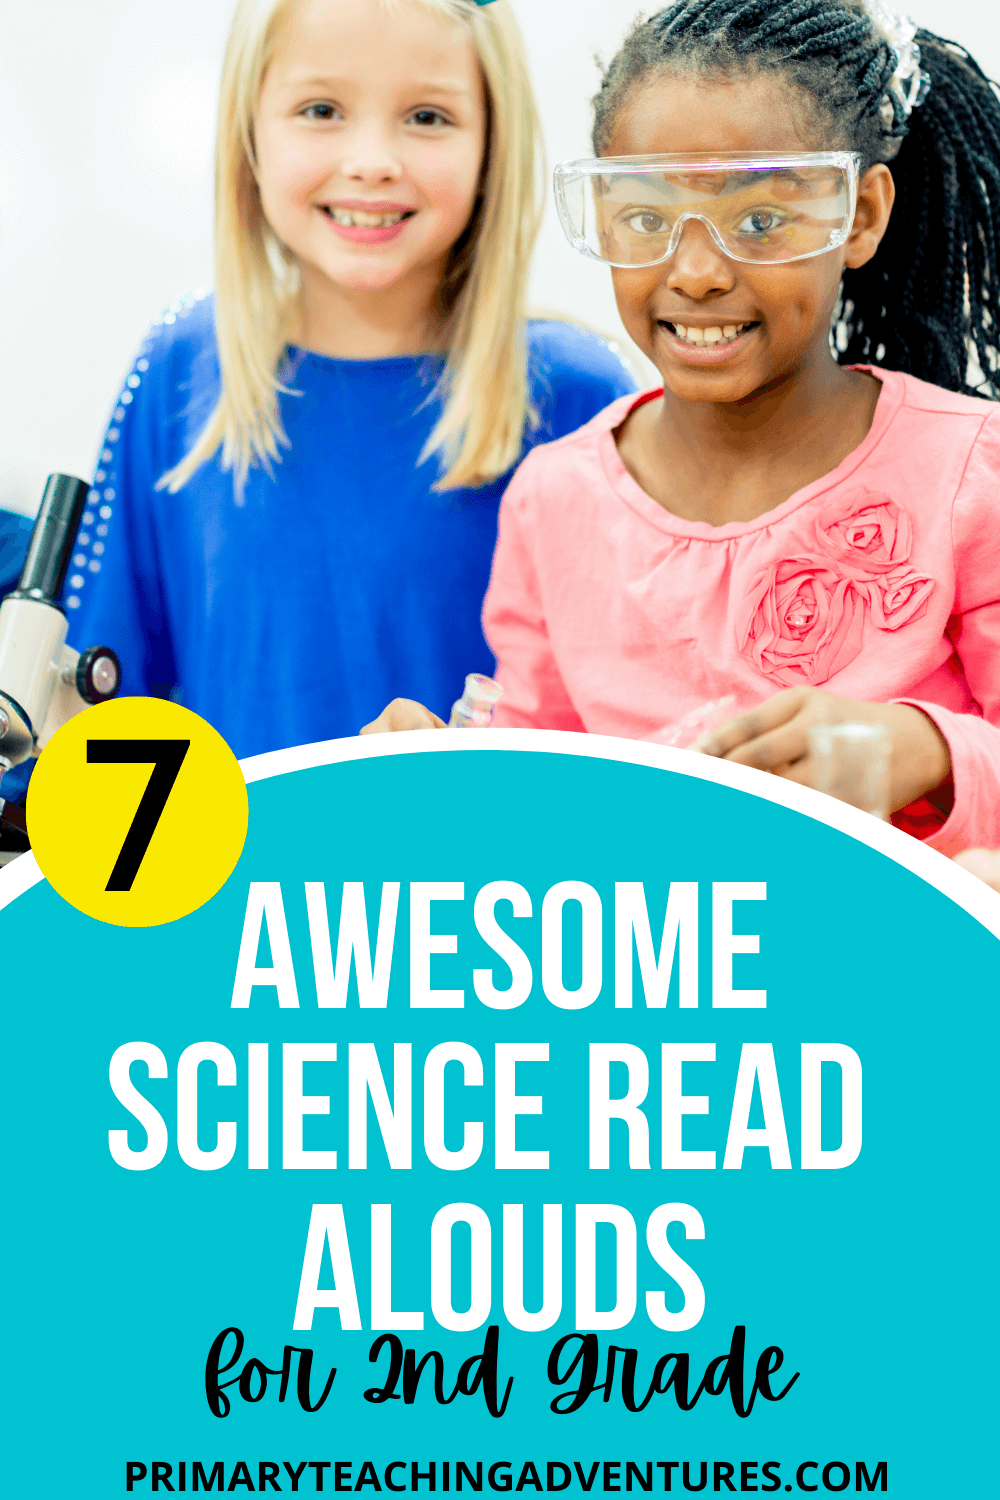 7-awesome-science-read-aloud-books-for-2nd-grade-primary-teaching